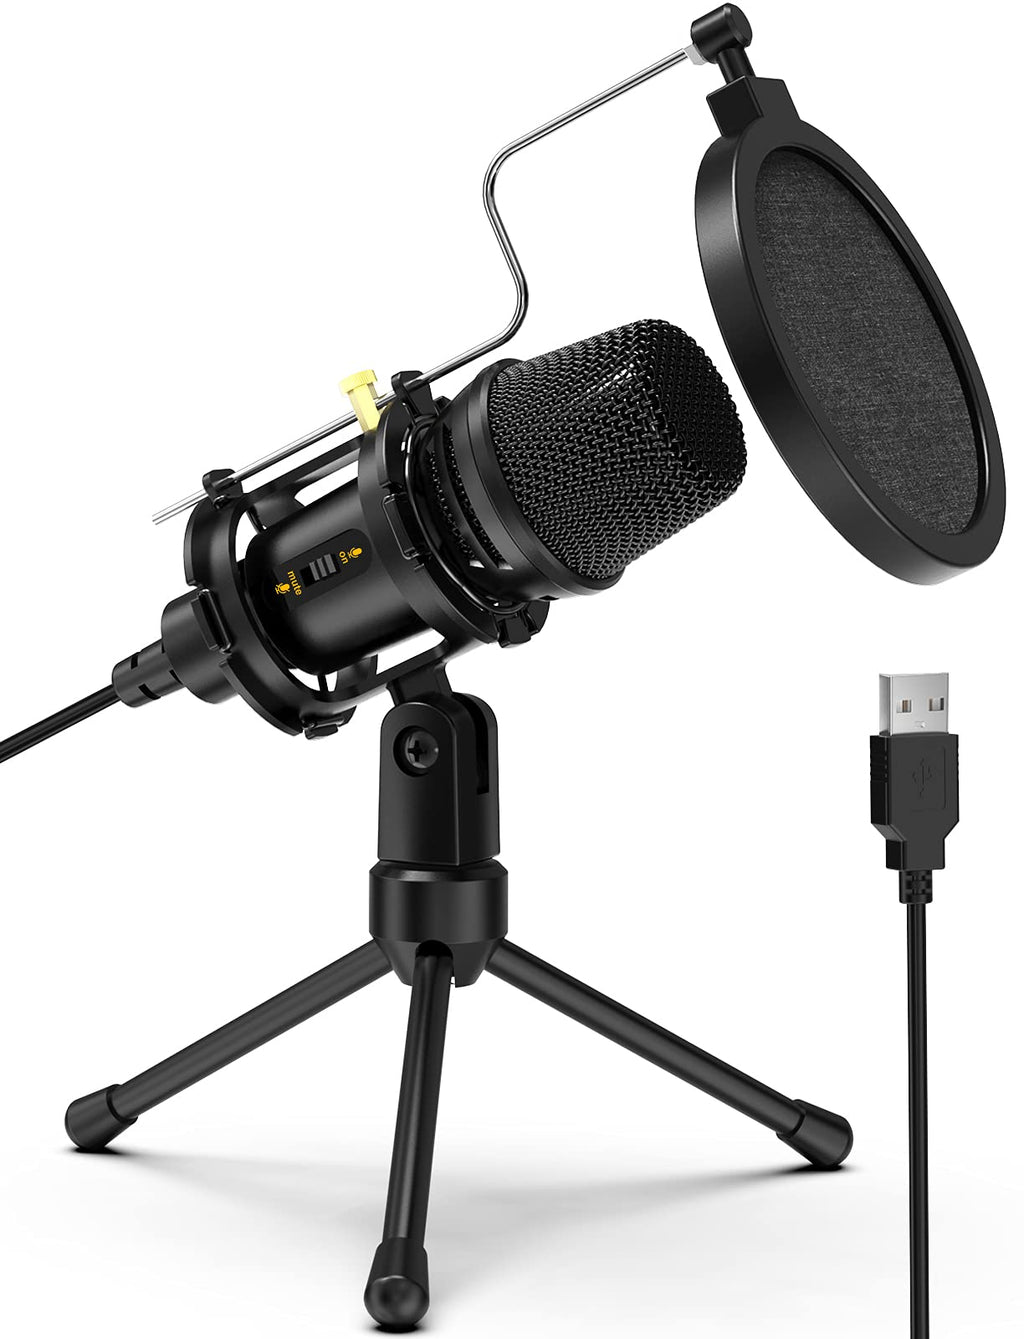 Computer Microphone,NJSJ USB Condenser Studio Microphone with Tripod Stand & Pop Filter for Zoom Skype Youtube Streaming Gaming Podcasting,Compatible with Windows iMac PC